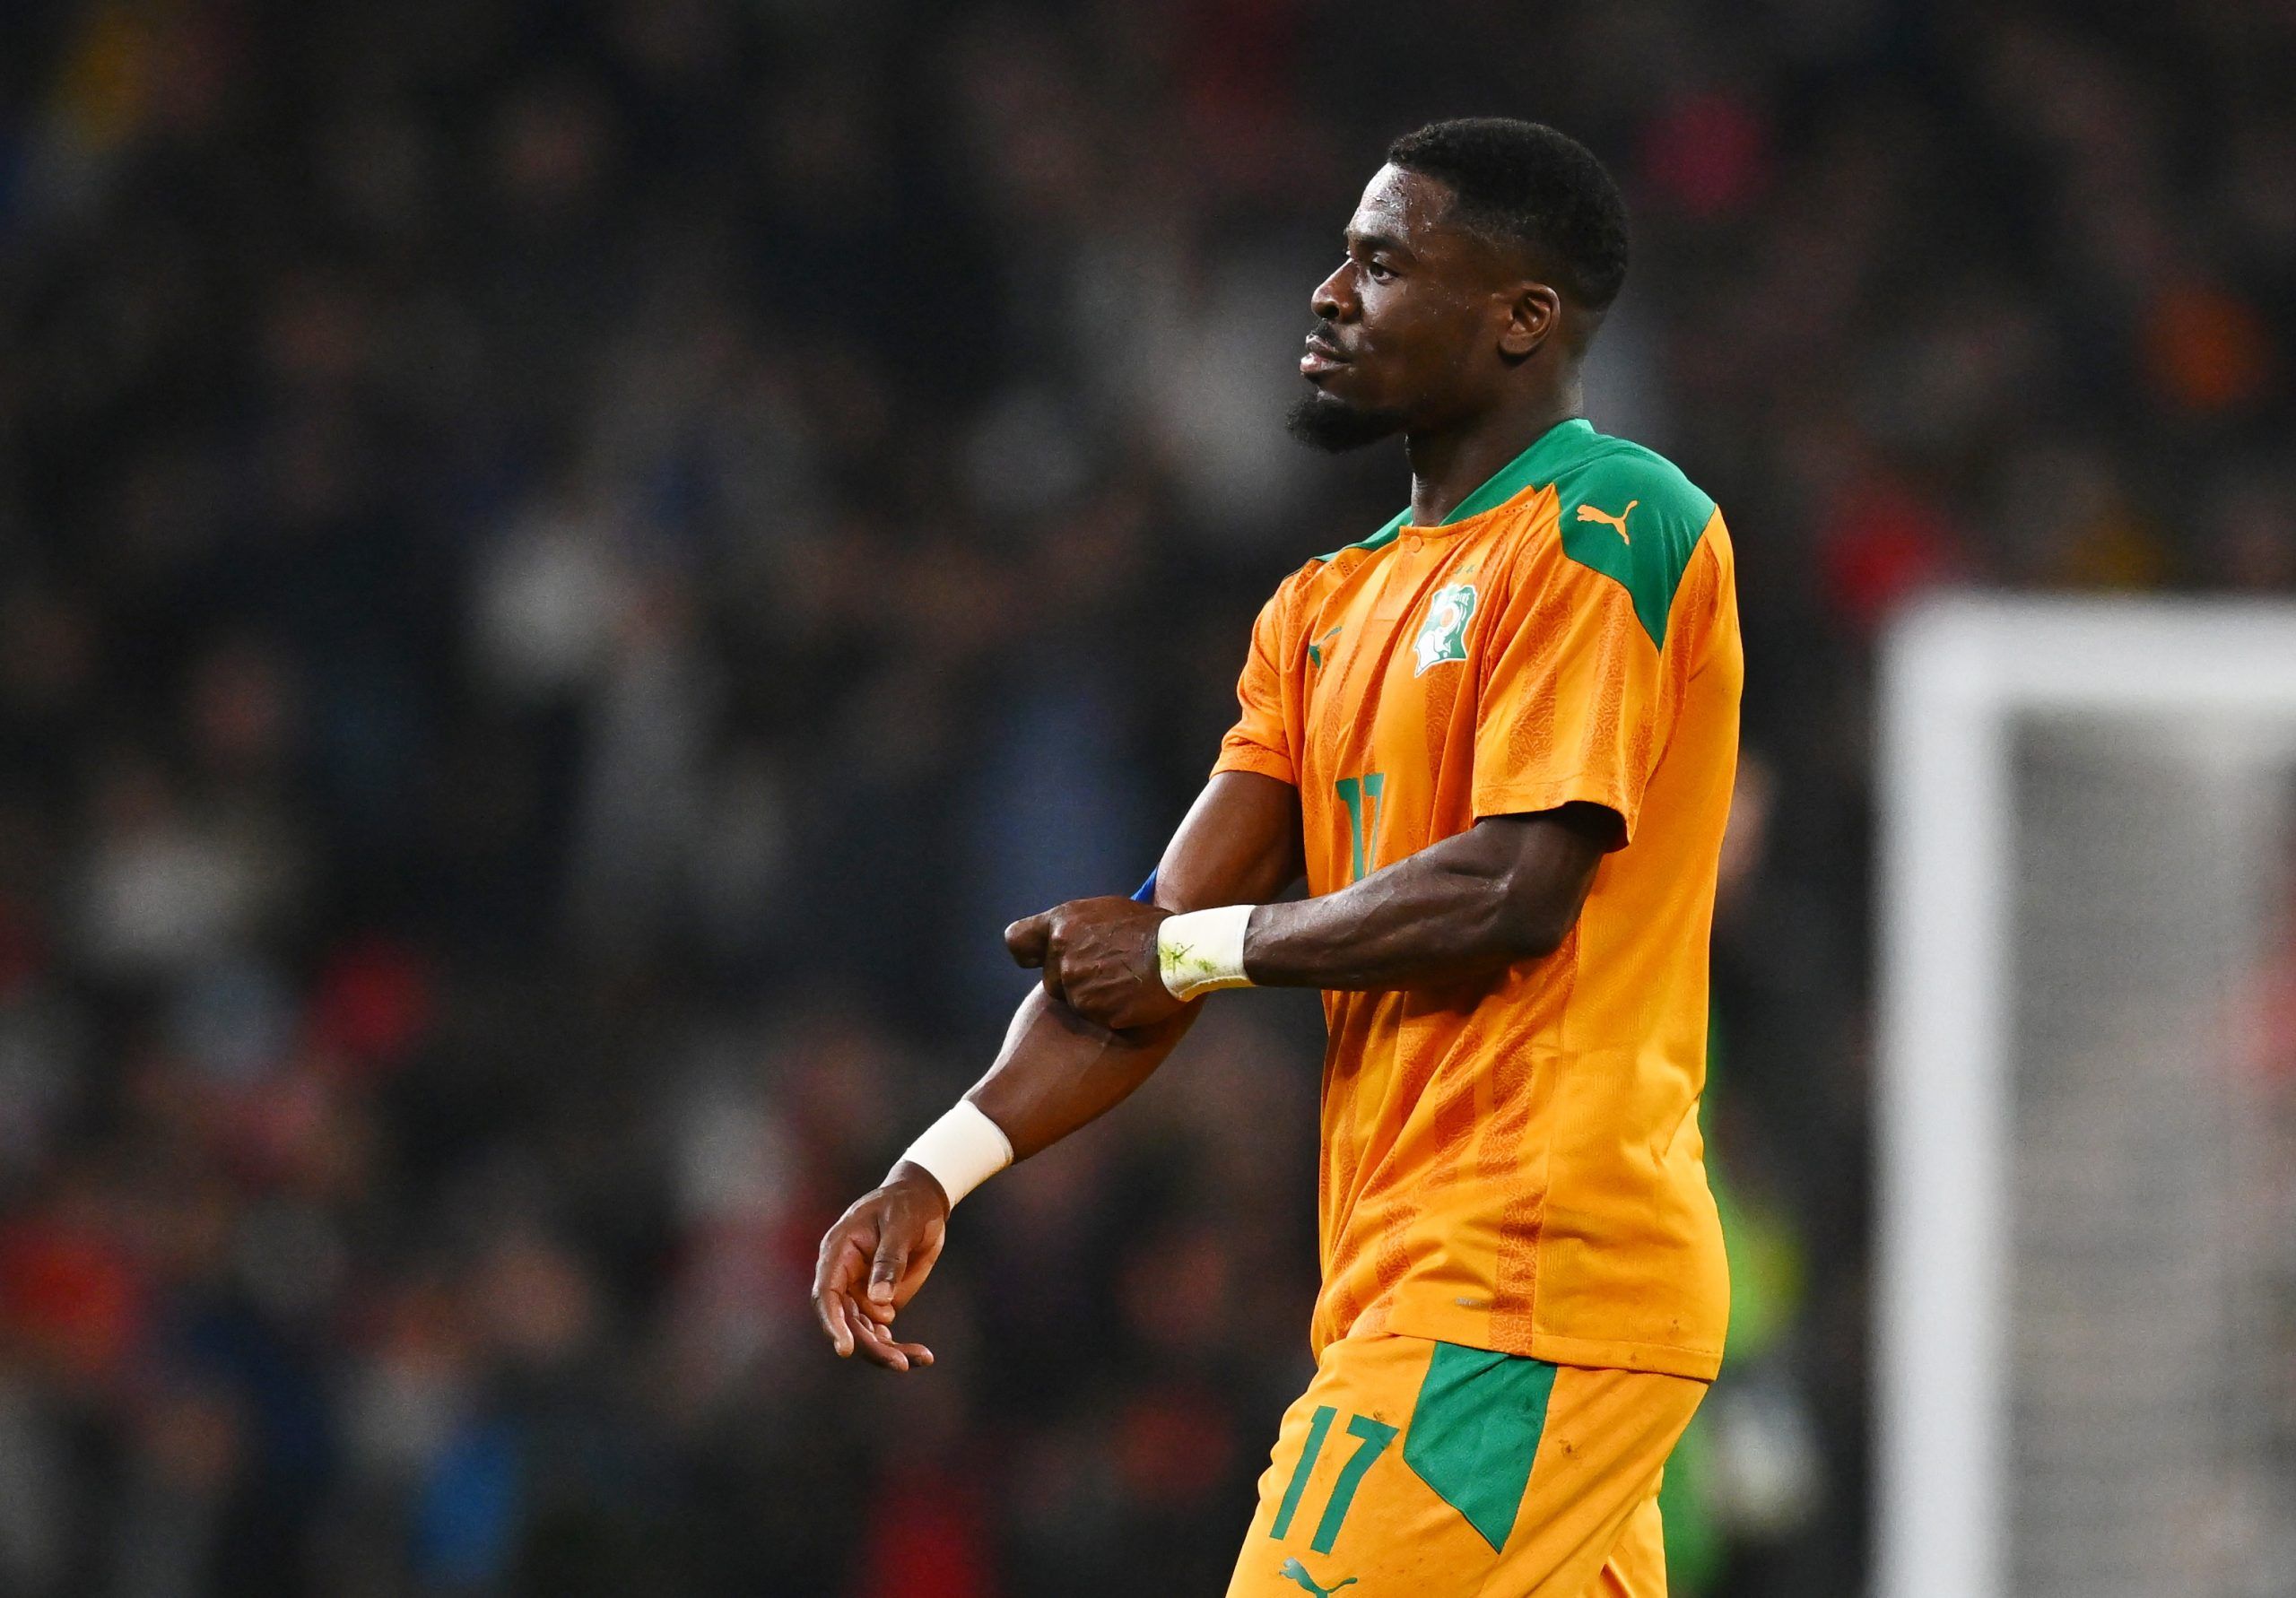 Soccer Football - International Friendly - England v Ivory Coast - Wembley Stadium, London, Britain - March 29, 2022 Ivory Coast's Serge Aurier reacts as he leaves the pitch after being shown a red card REUTERS/Dylan Martinez